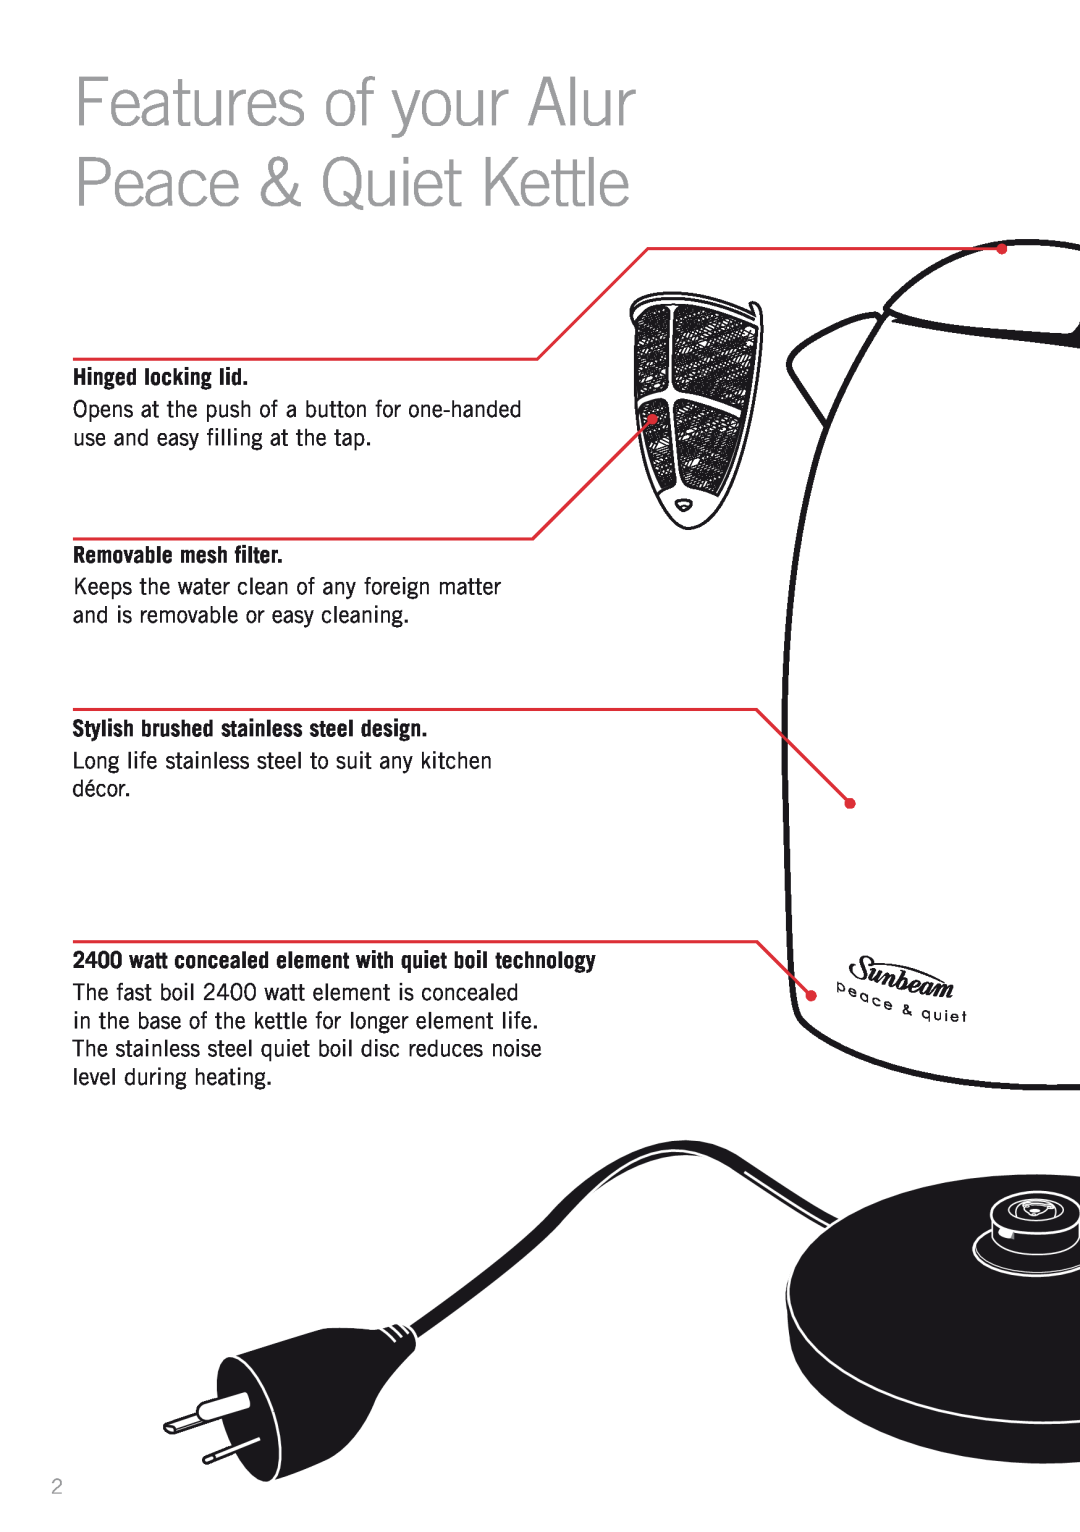 Sunbeam KE7500S manual Features of your Alur Peace & Quiet Kettle, Hinged locking lid, Removable mesh filter 